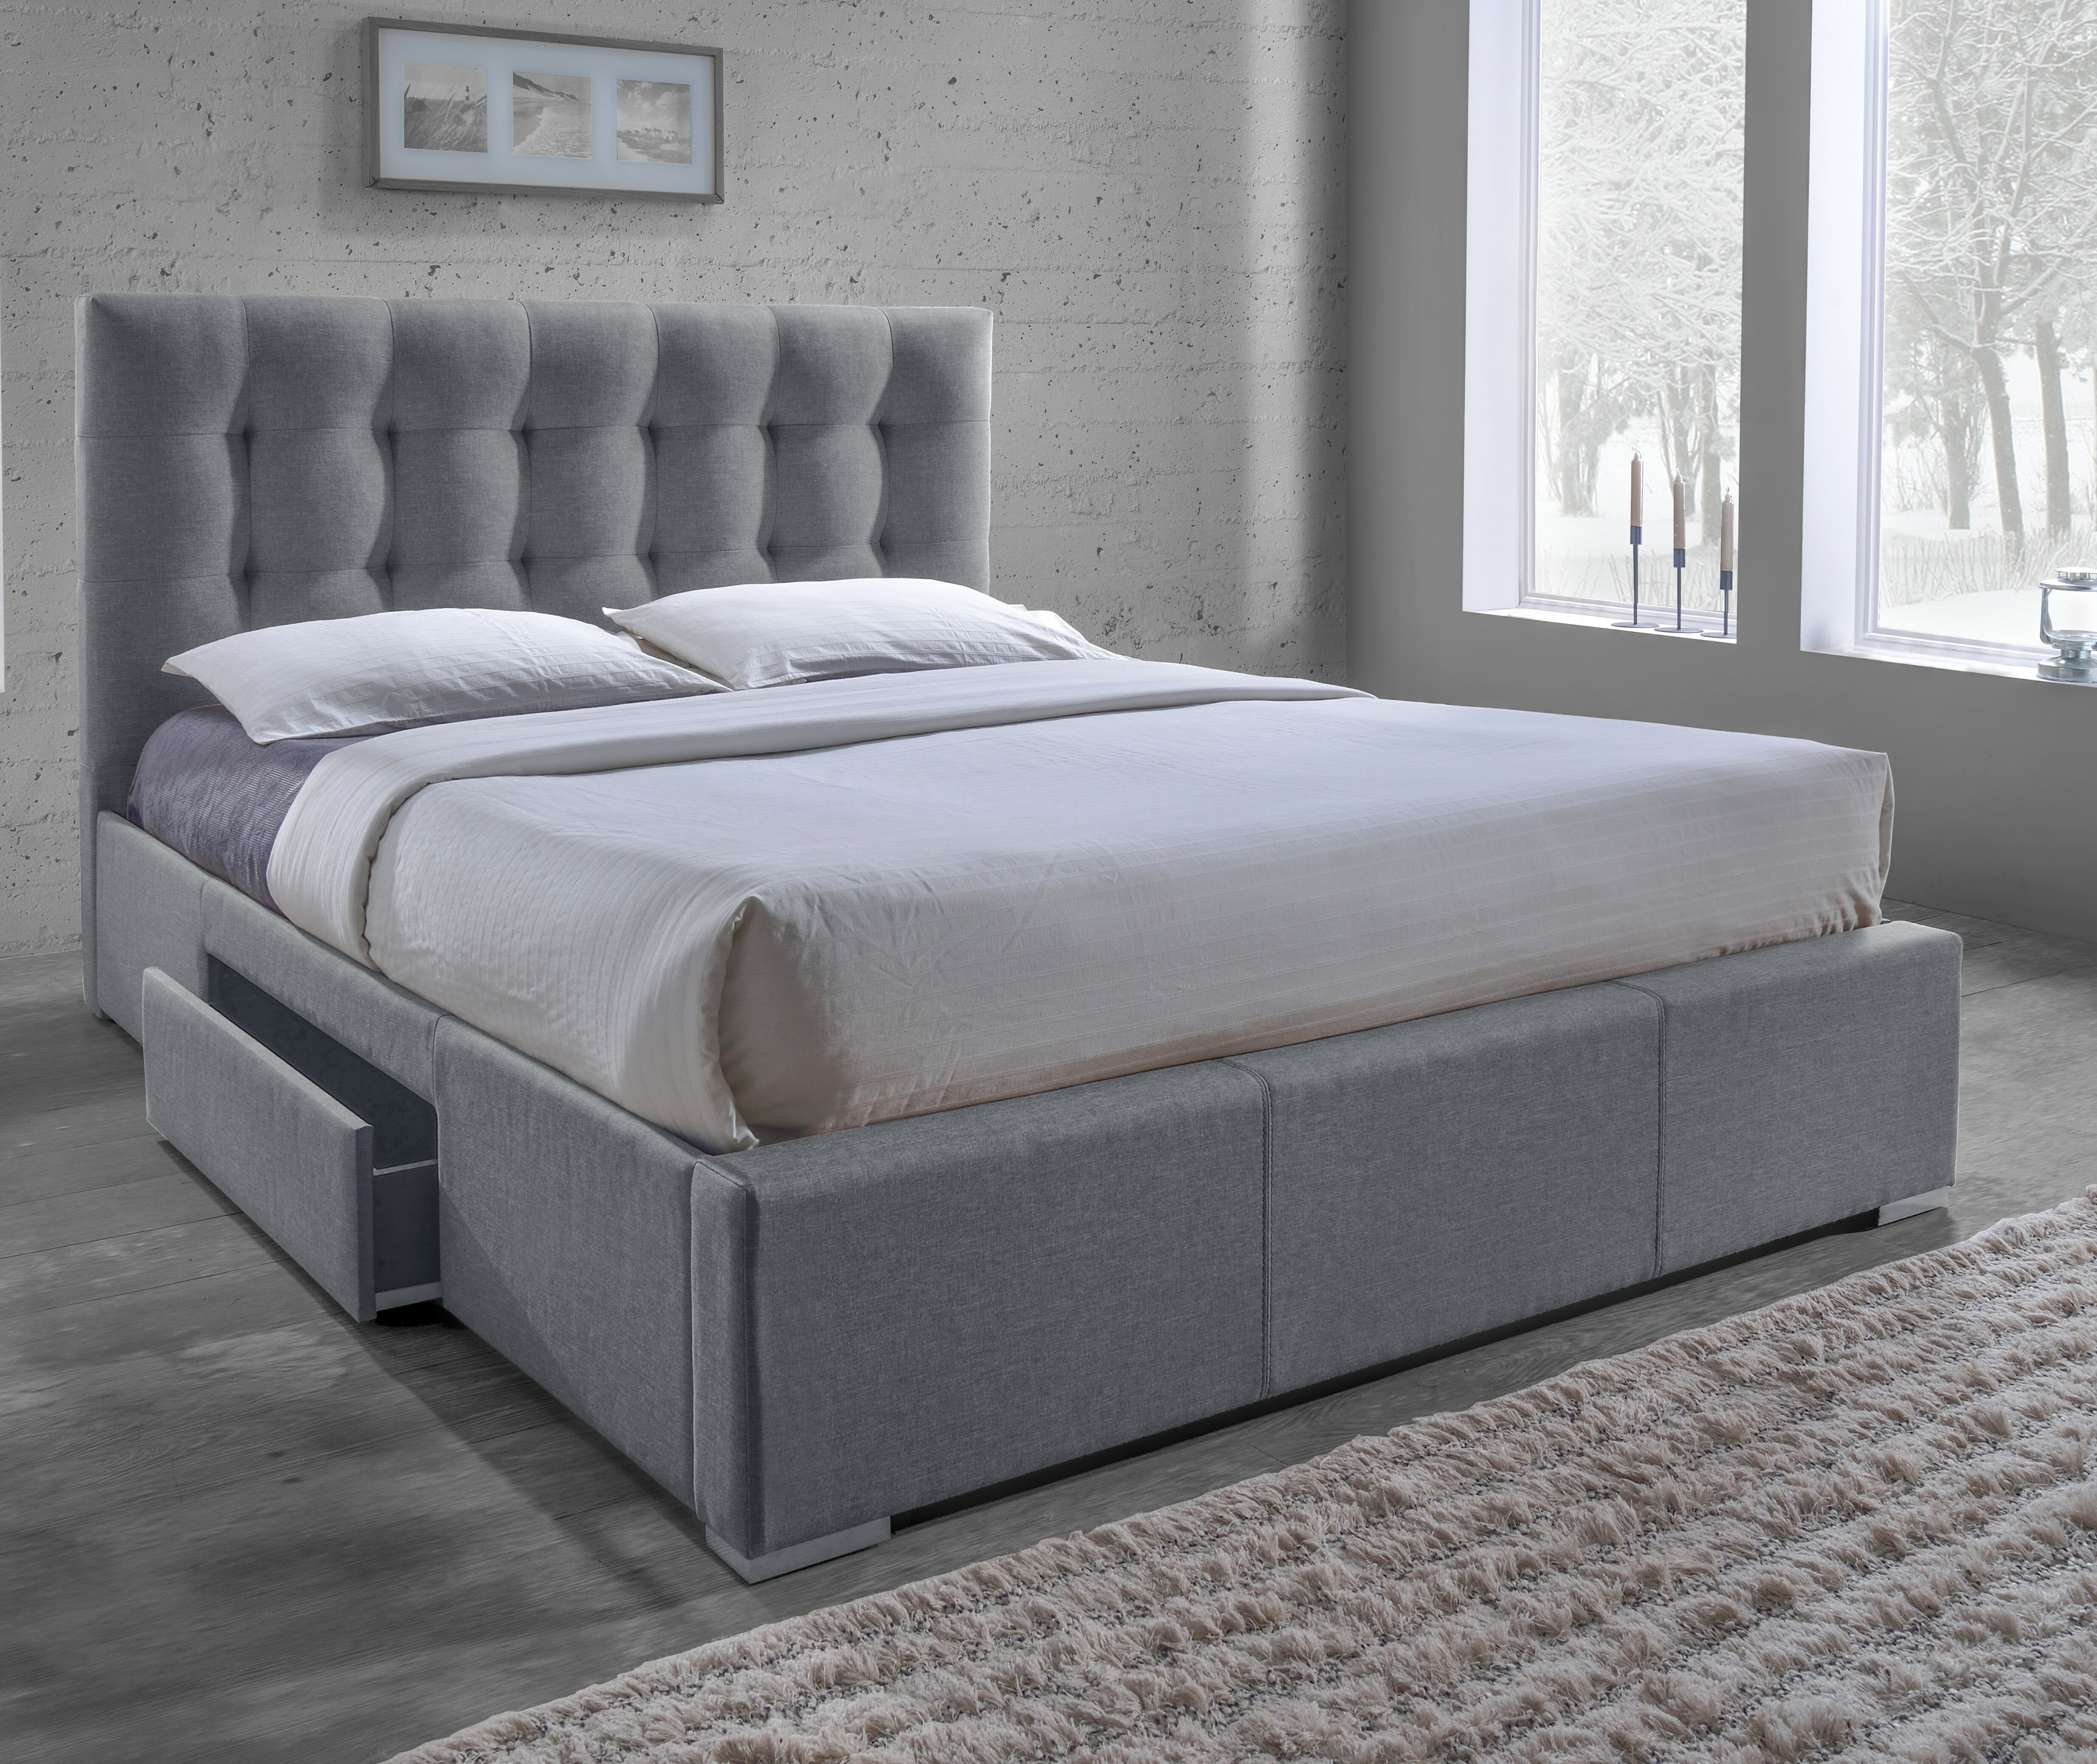 King Size Storage Beds You Ll Love In 2020 Wayfair